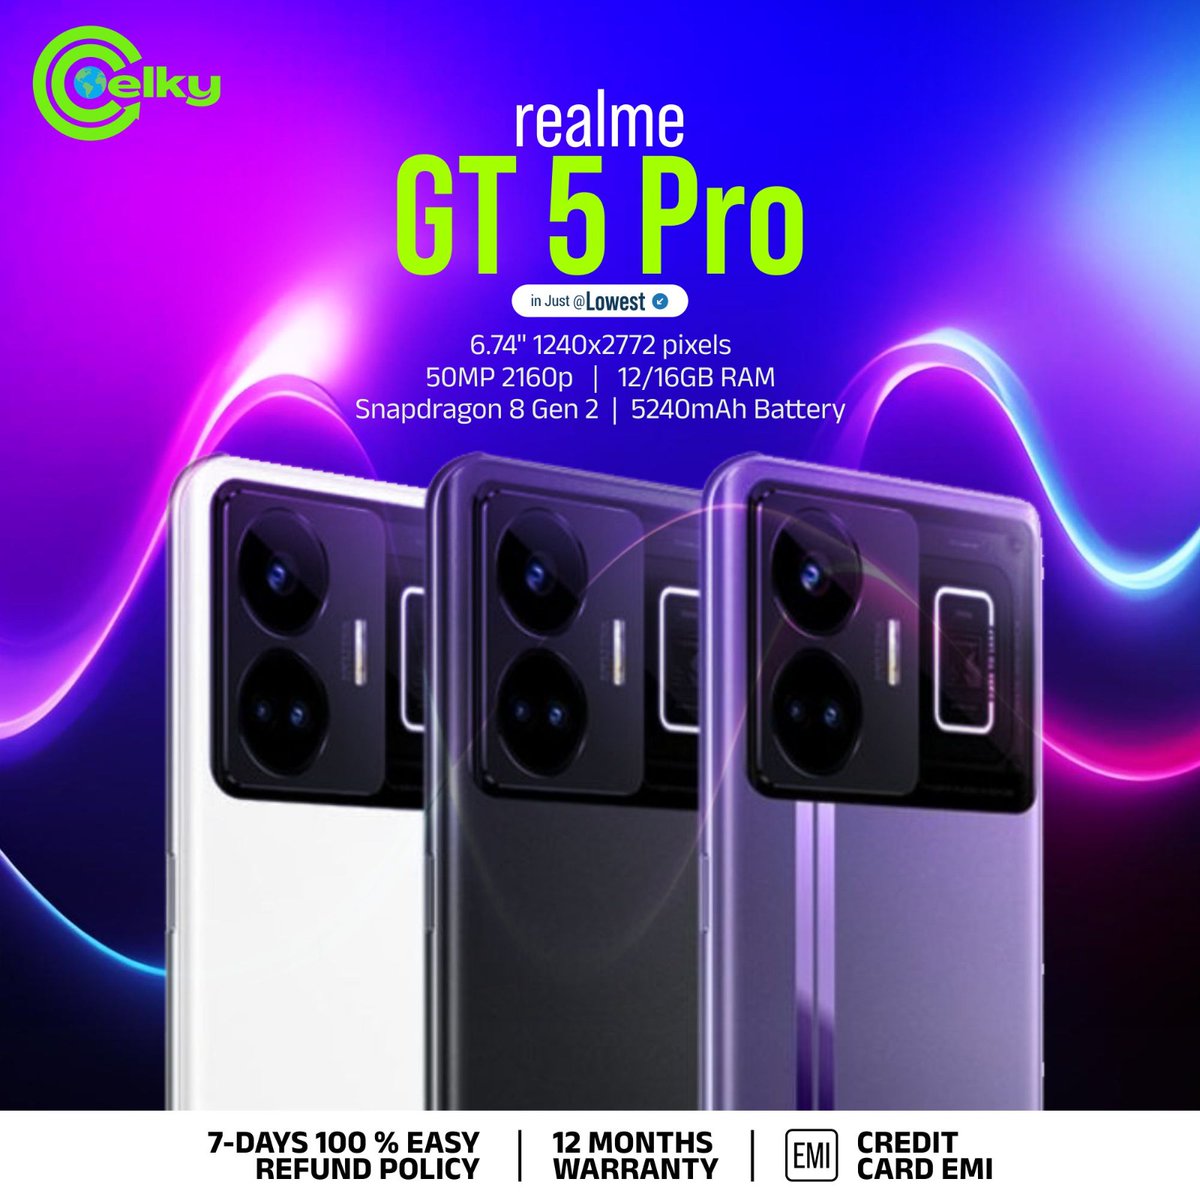 Unleash the Power 🚀 - Introducing the Realme GT 5 Pro! 📱💥 Get ready to experience speed like never before. #RealmeGT5Pro #SpeedUnleashed #TechGameChanger #Celky #explore #explorepage